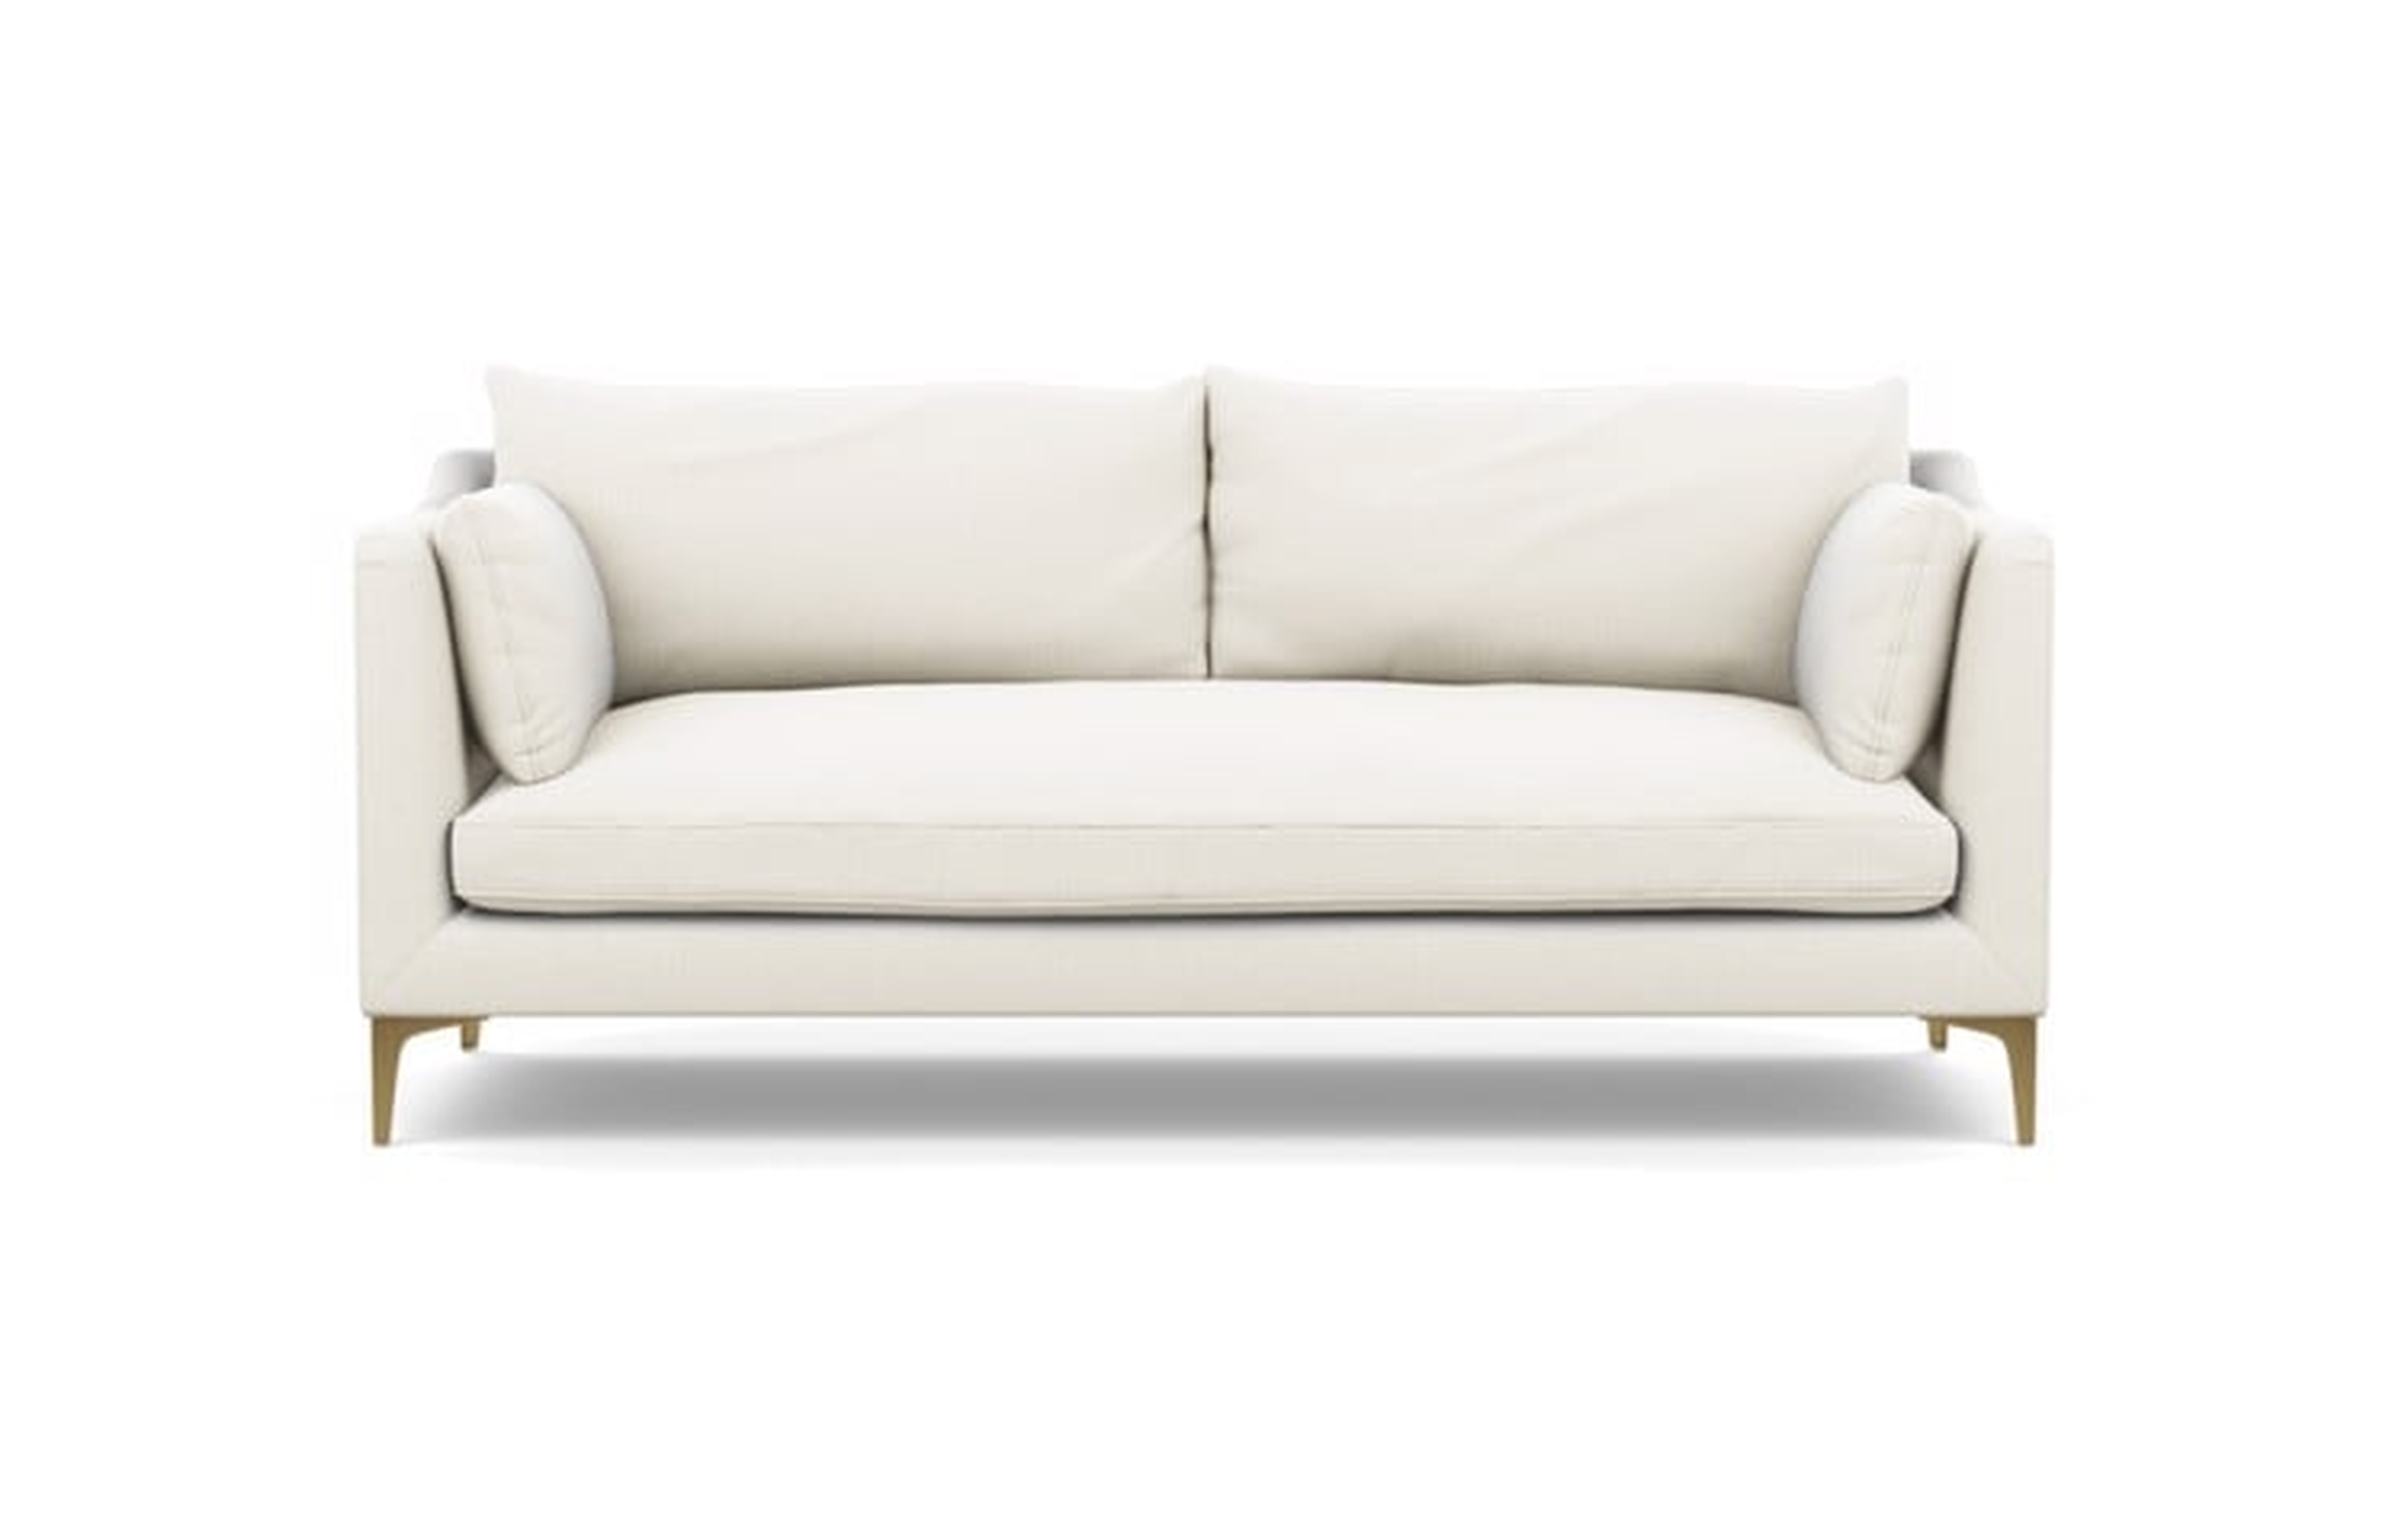 Caitlin by The Everygirl Sofa in Ivory Heavy Cloth Fabric with Brass Plated legs - 83" - Interior Define